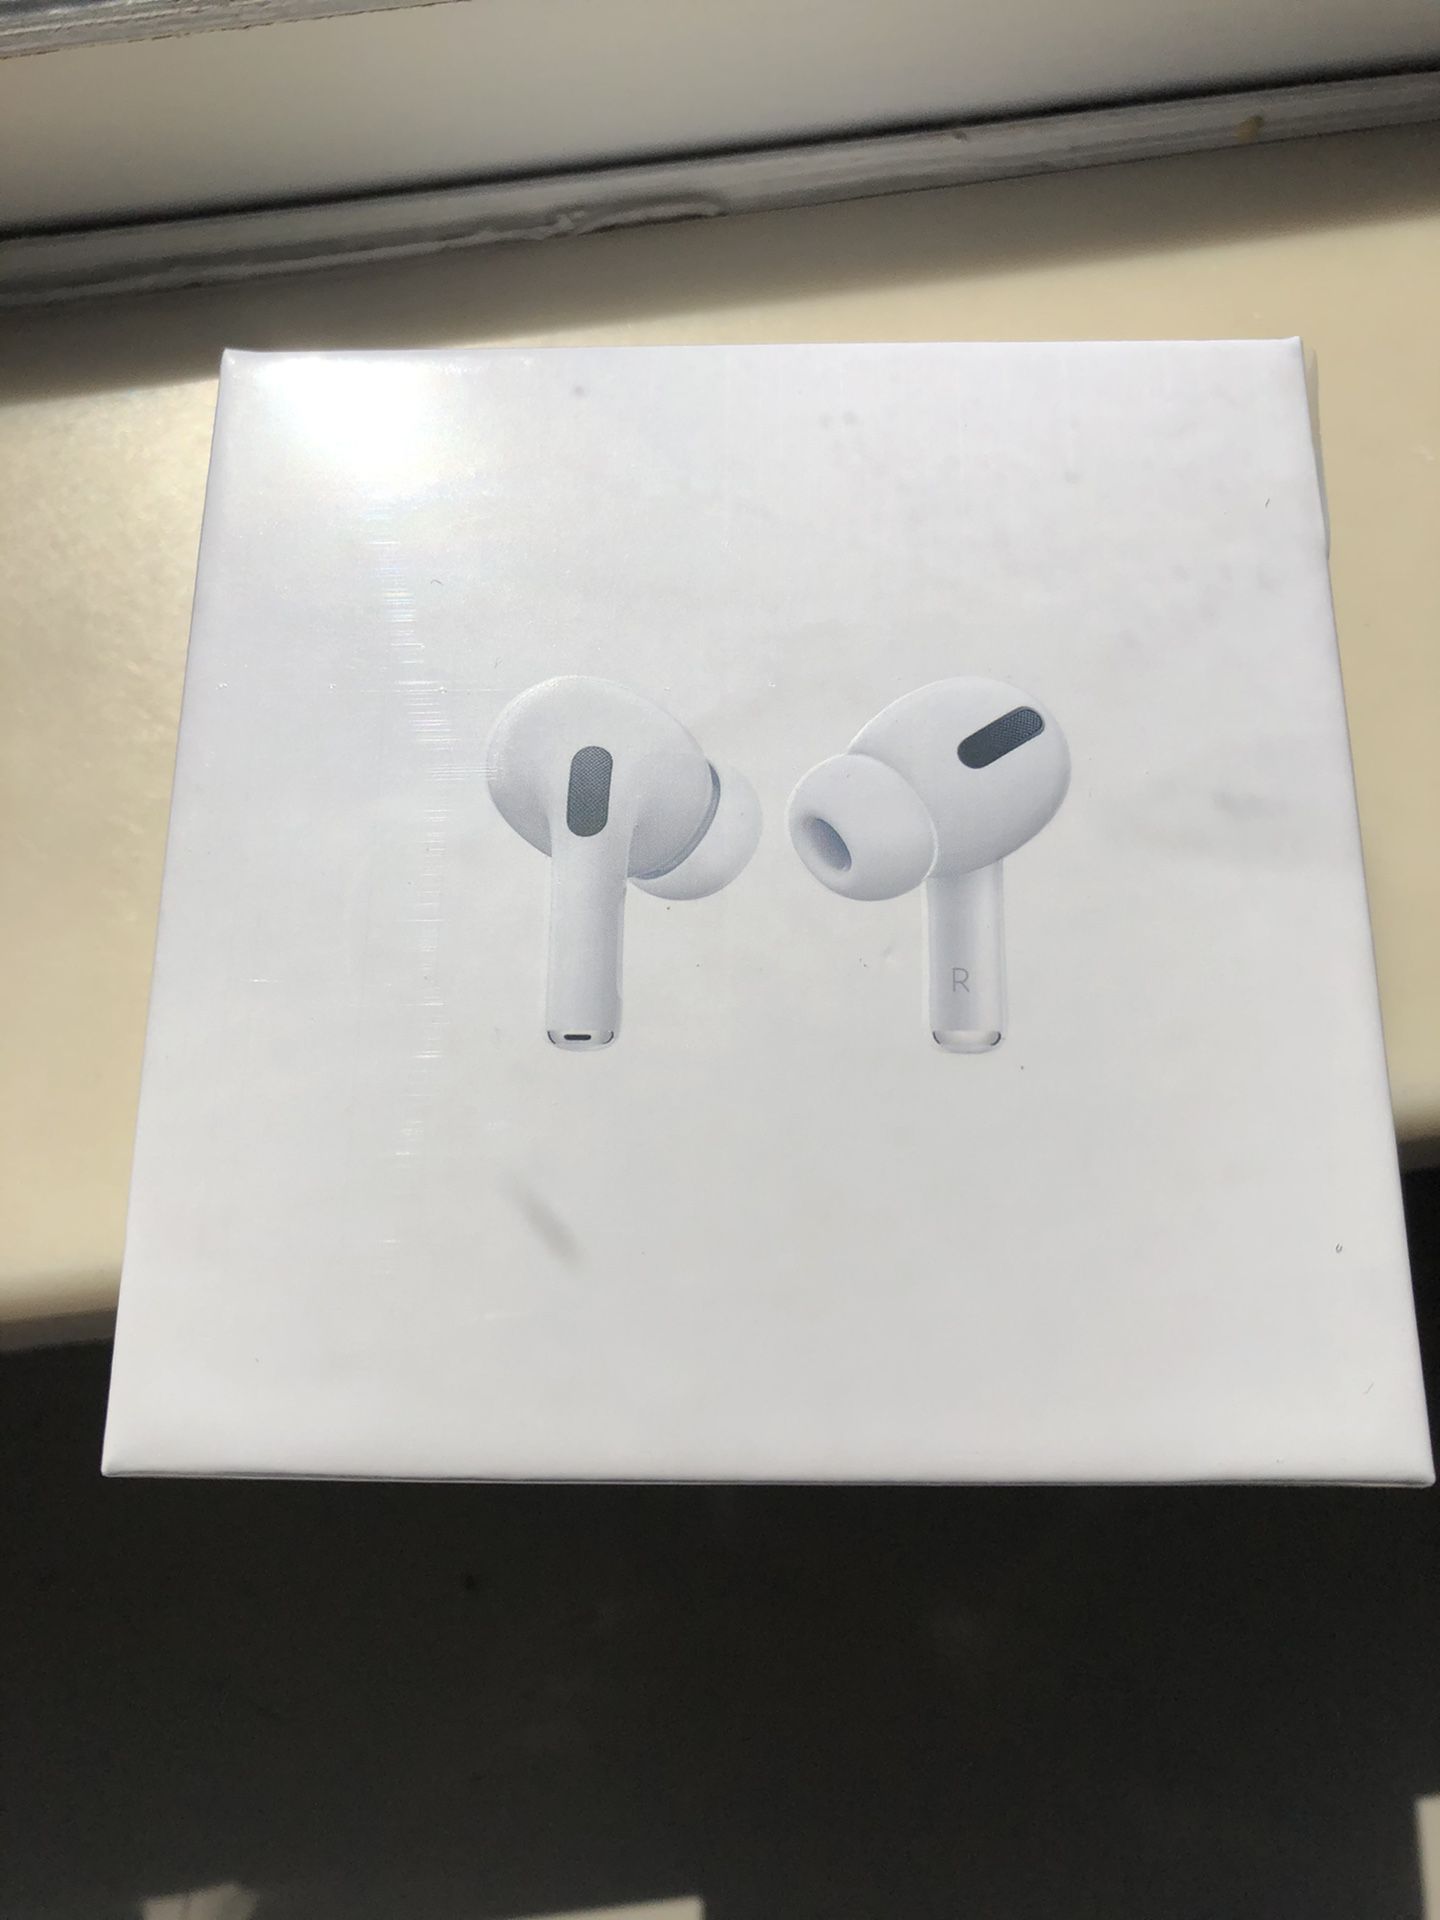 Apple AirPods Pro’s